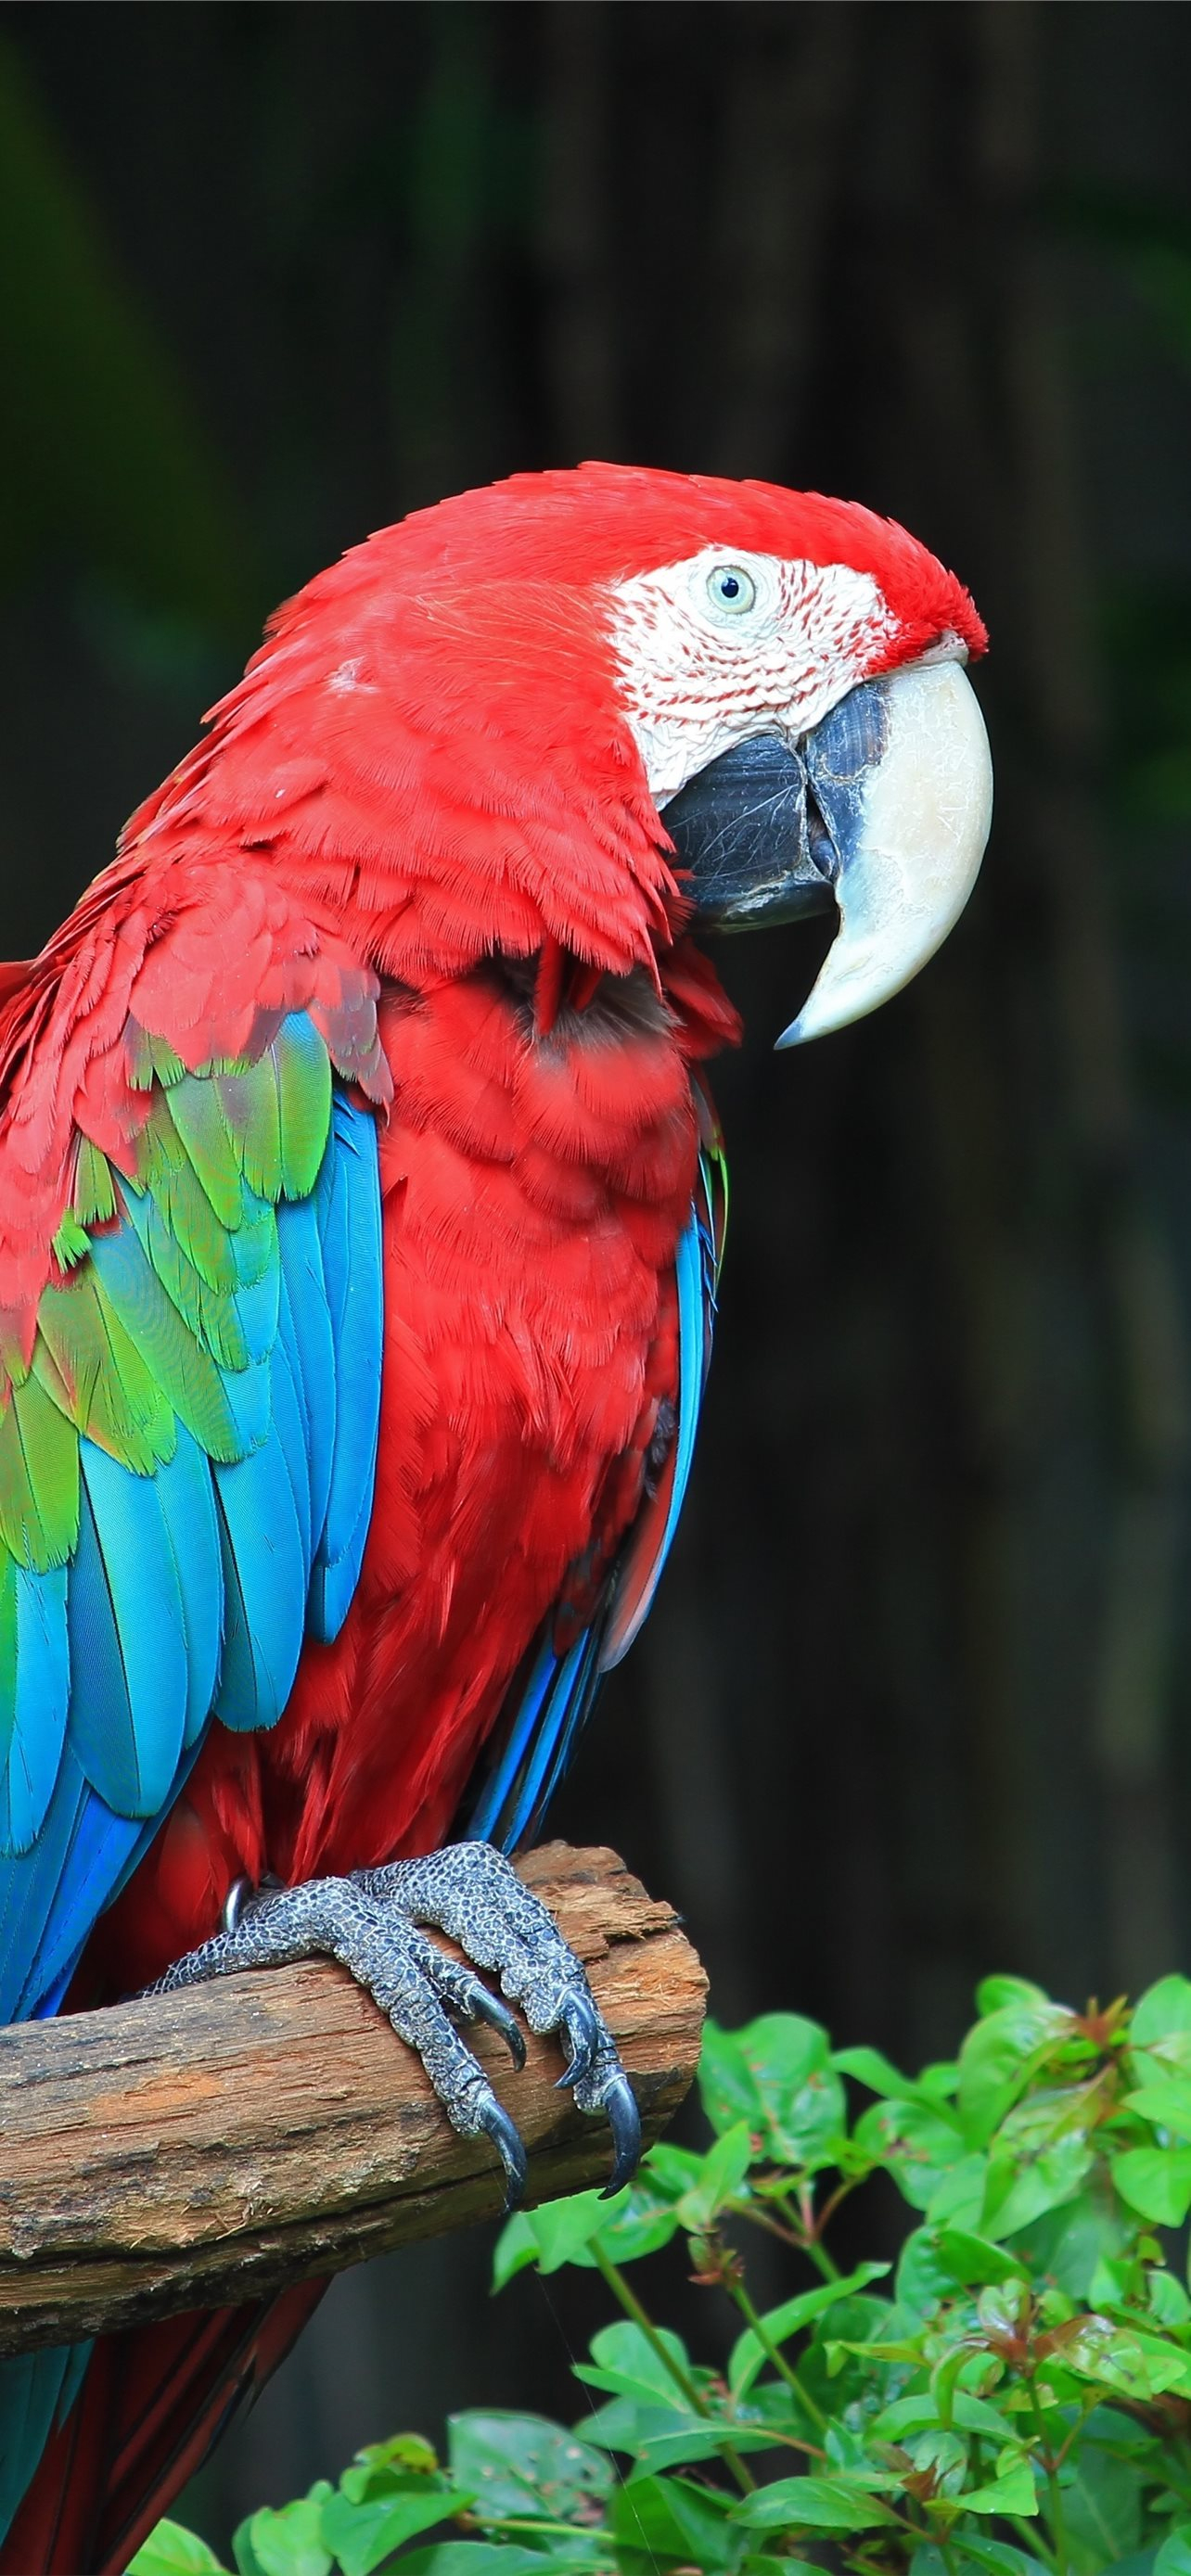 1284x2778 Colorful Parrot Bird on Tree Branch iPhone Wallpapers Free Download